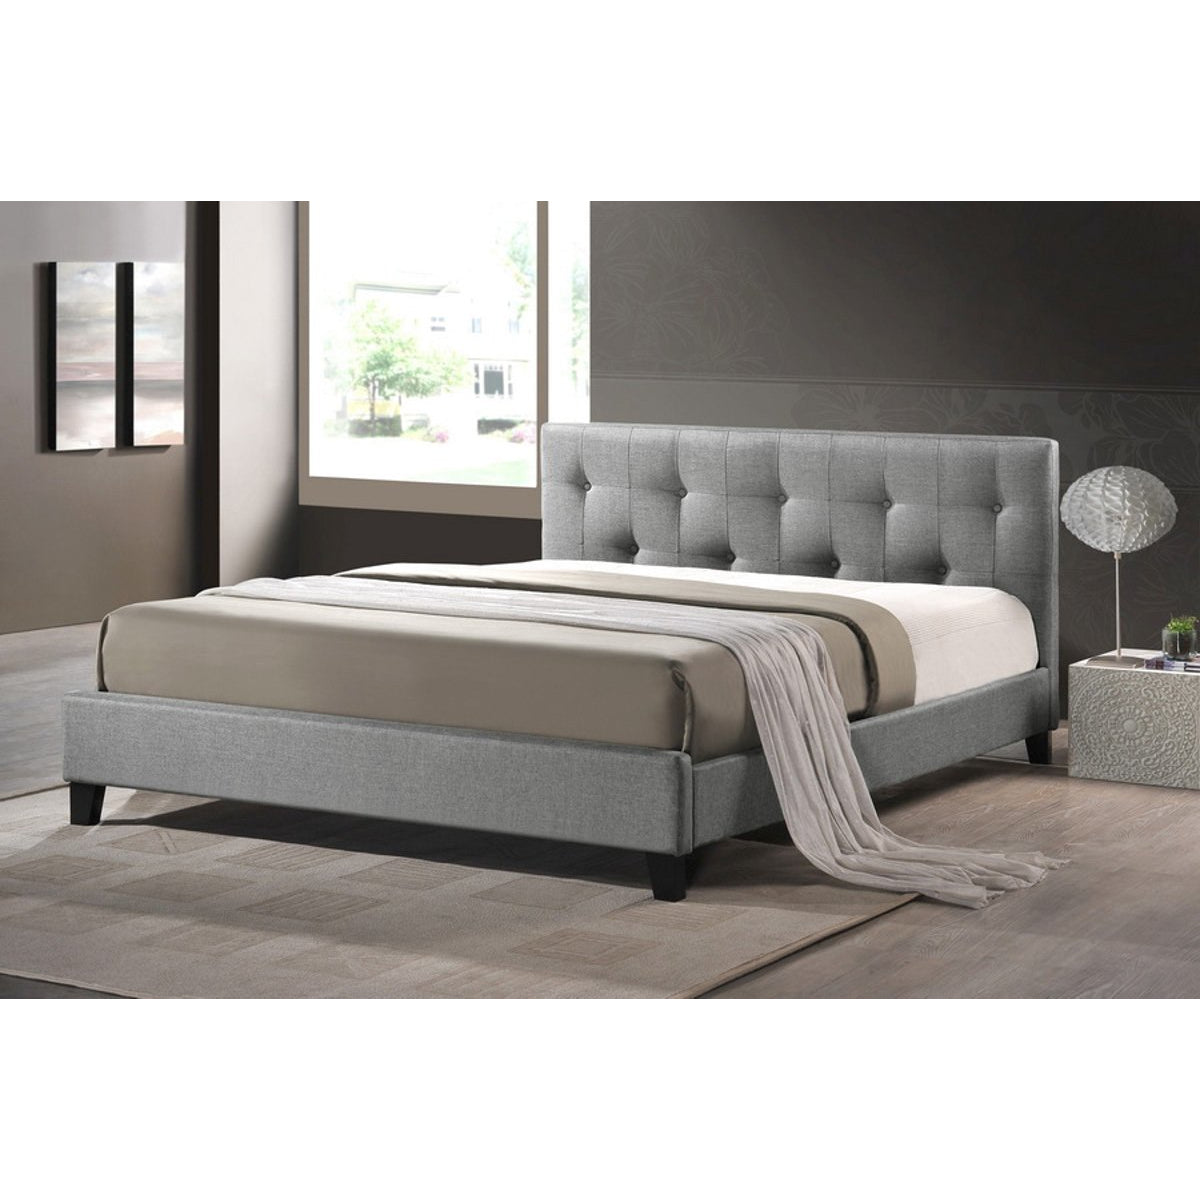 Baxton Studio Annette Gray Linen Modern Bed with Upholstered Headboard - Queen Size Baxton Studio-beds-Minimal And Modern - 1